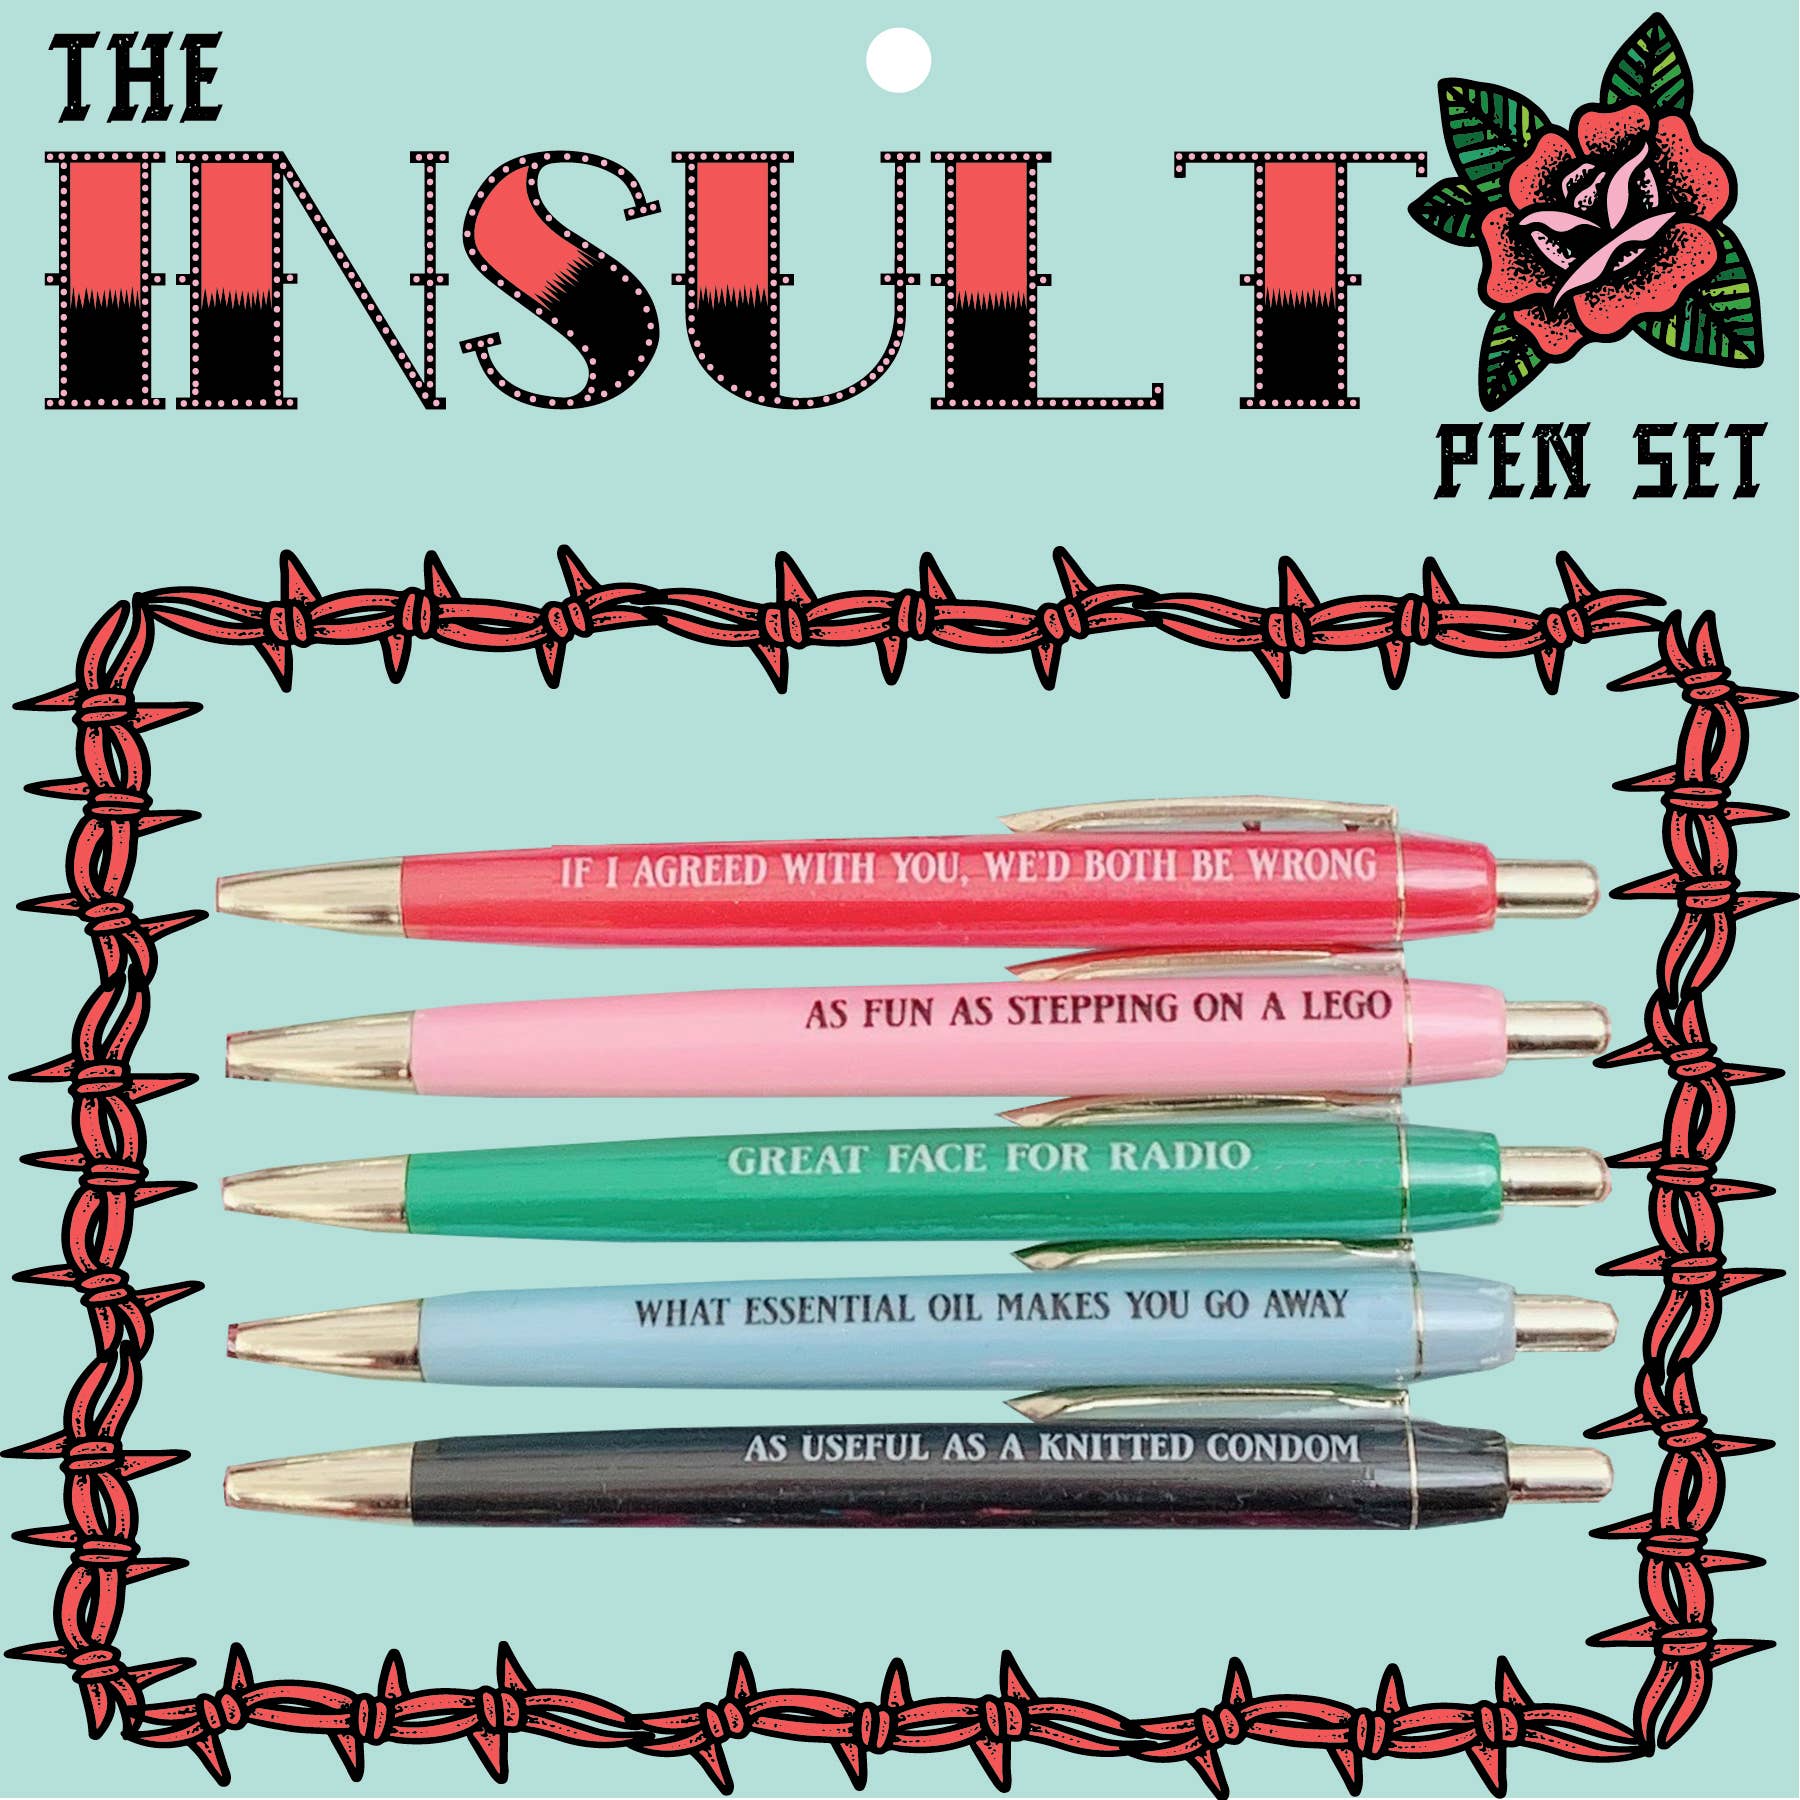 What insults have you received about your pen/paper collection